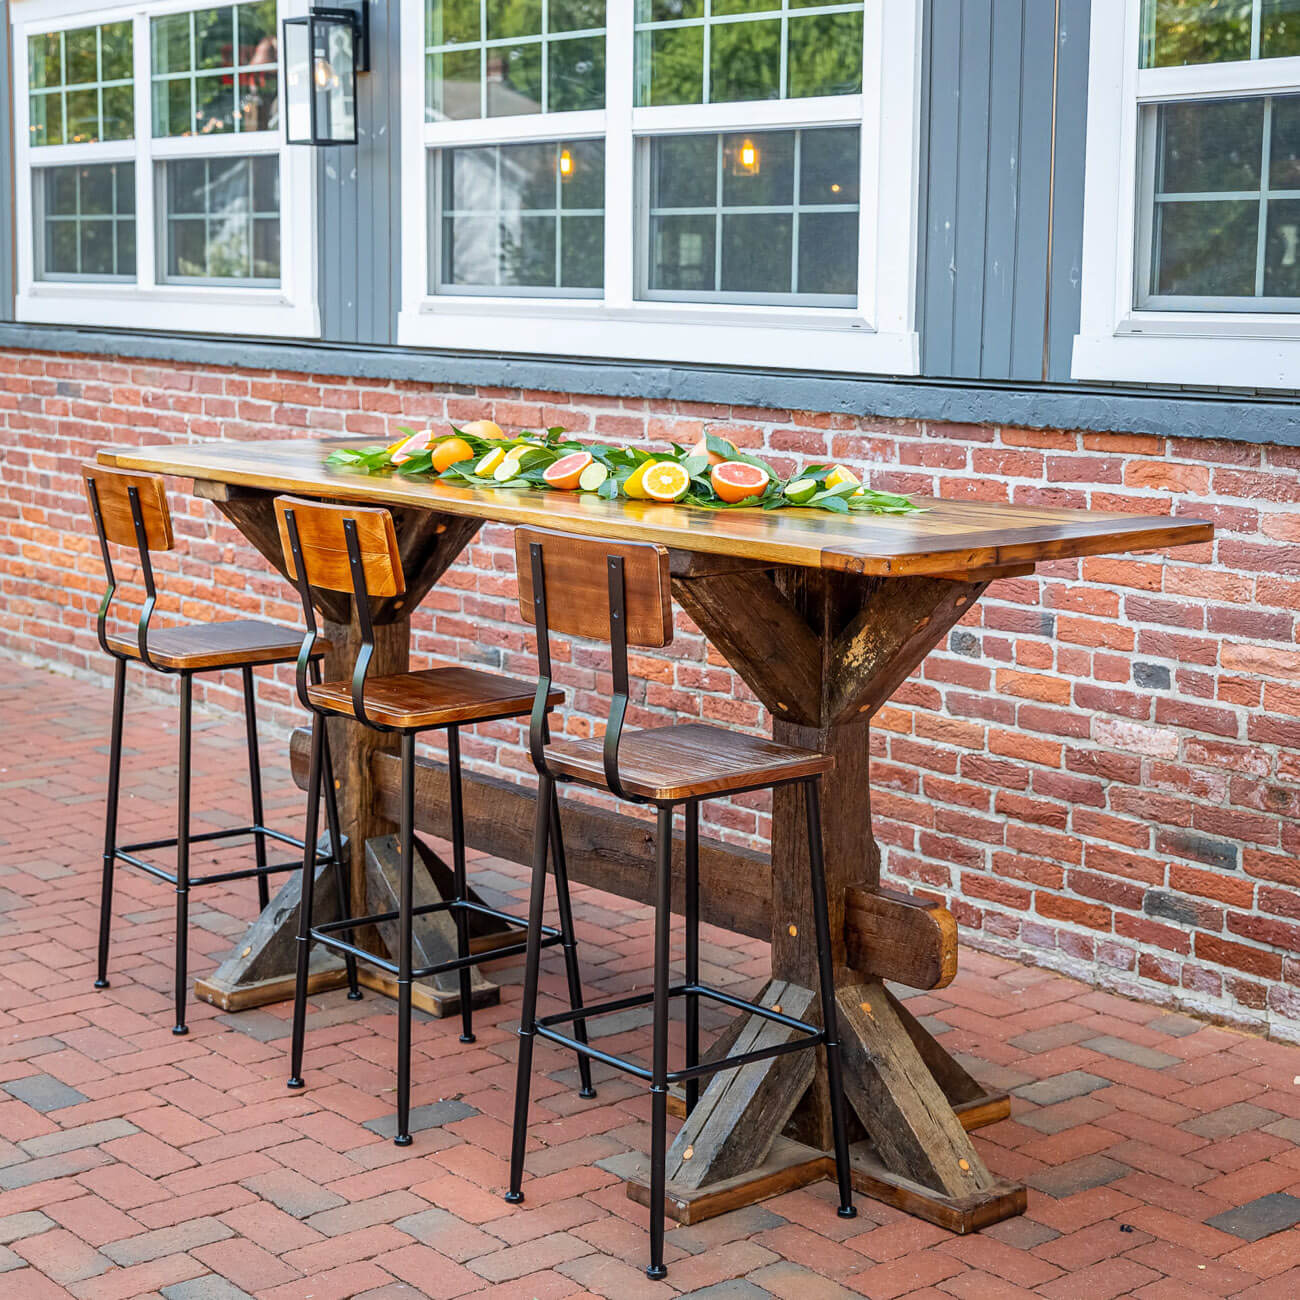 Bar table and stools made with reclaimed barn wood in front of a brick wall